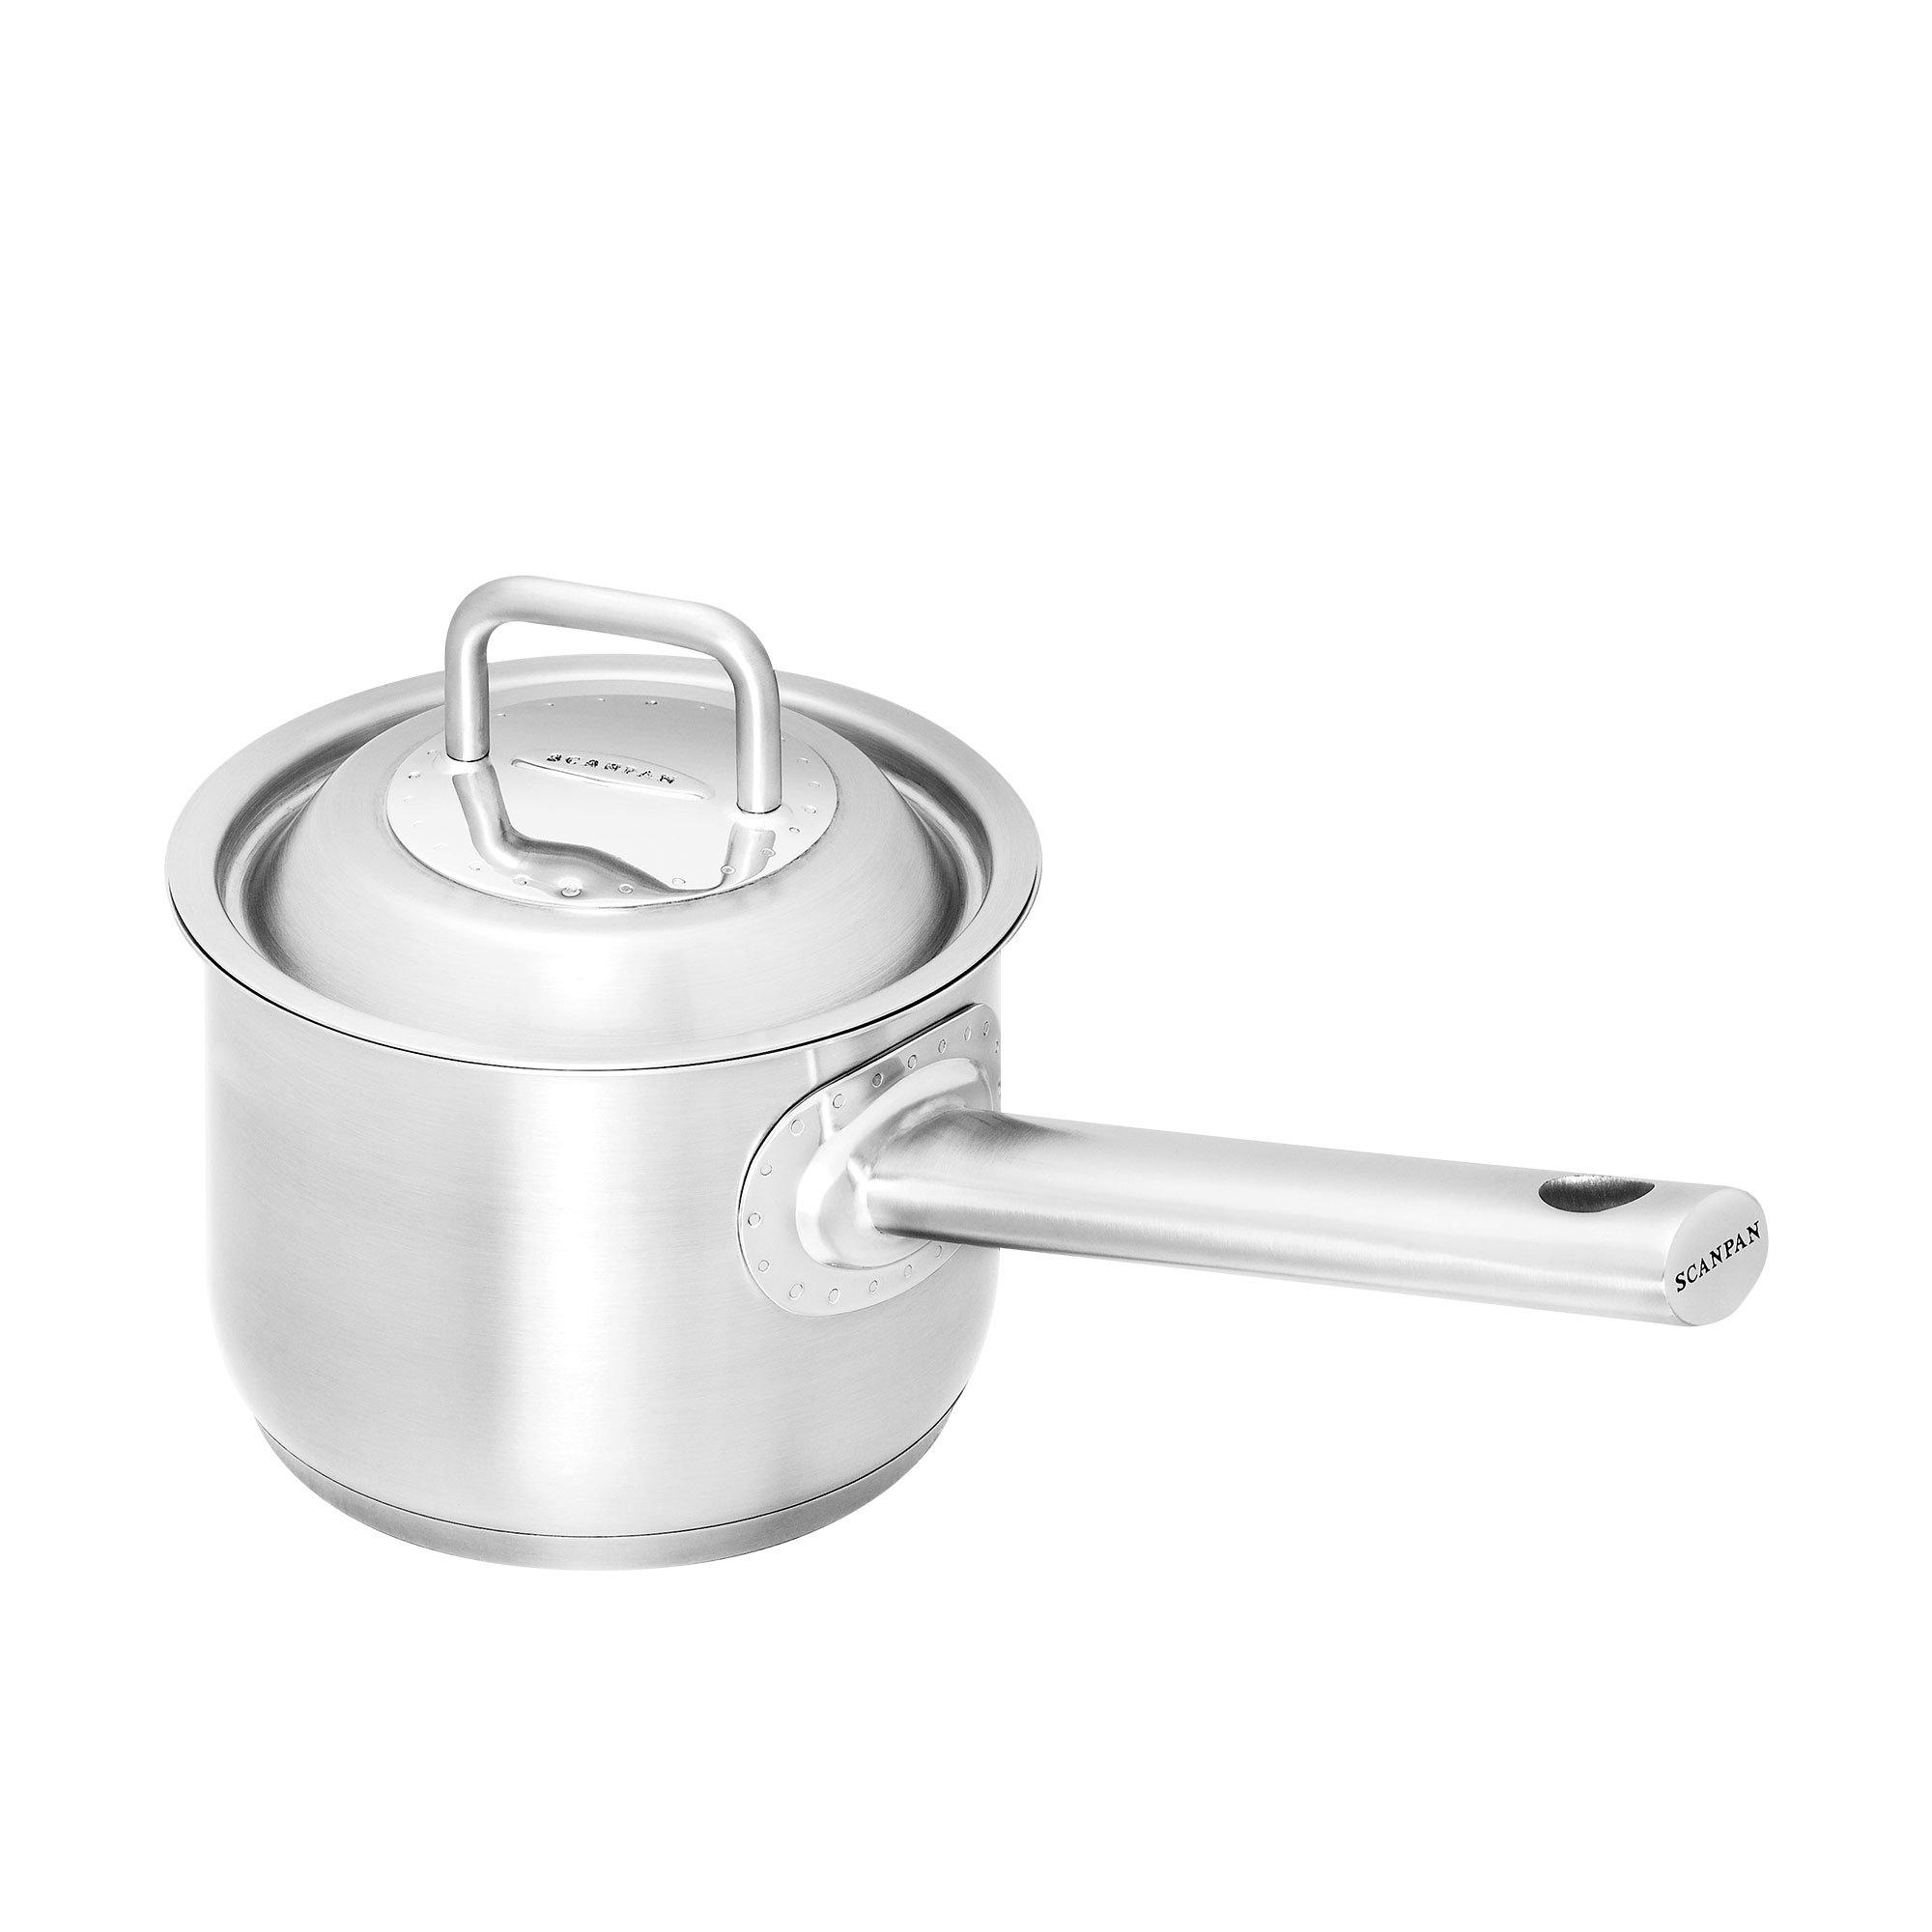 Scanpan Commercial Stainless Steel Covered Saucepan 14cm - 1.2L Image 1